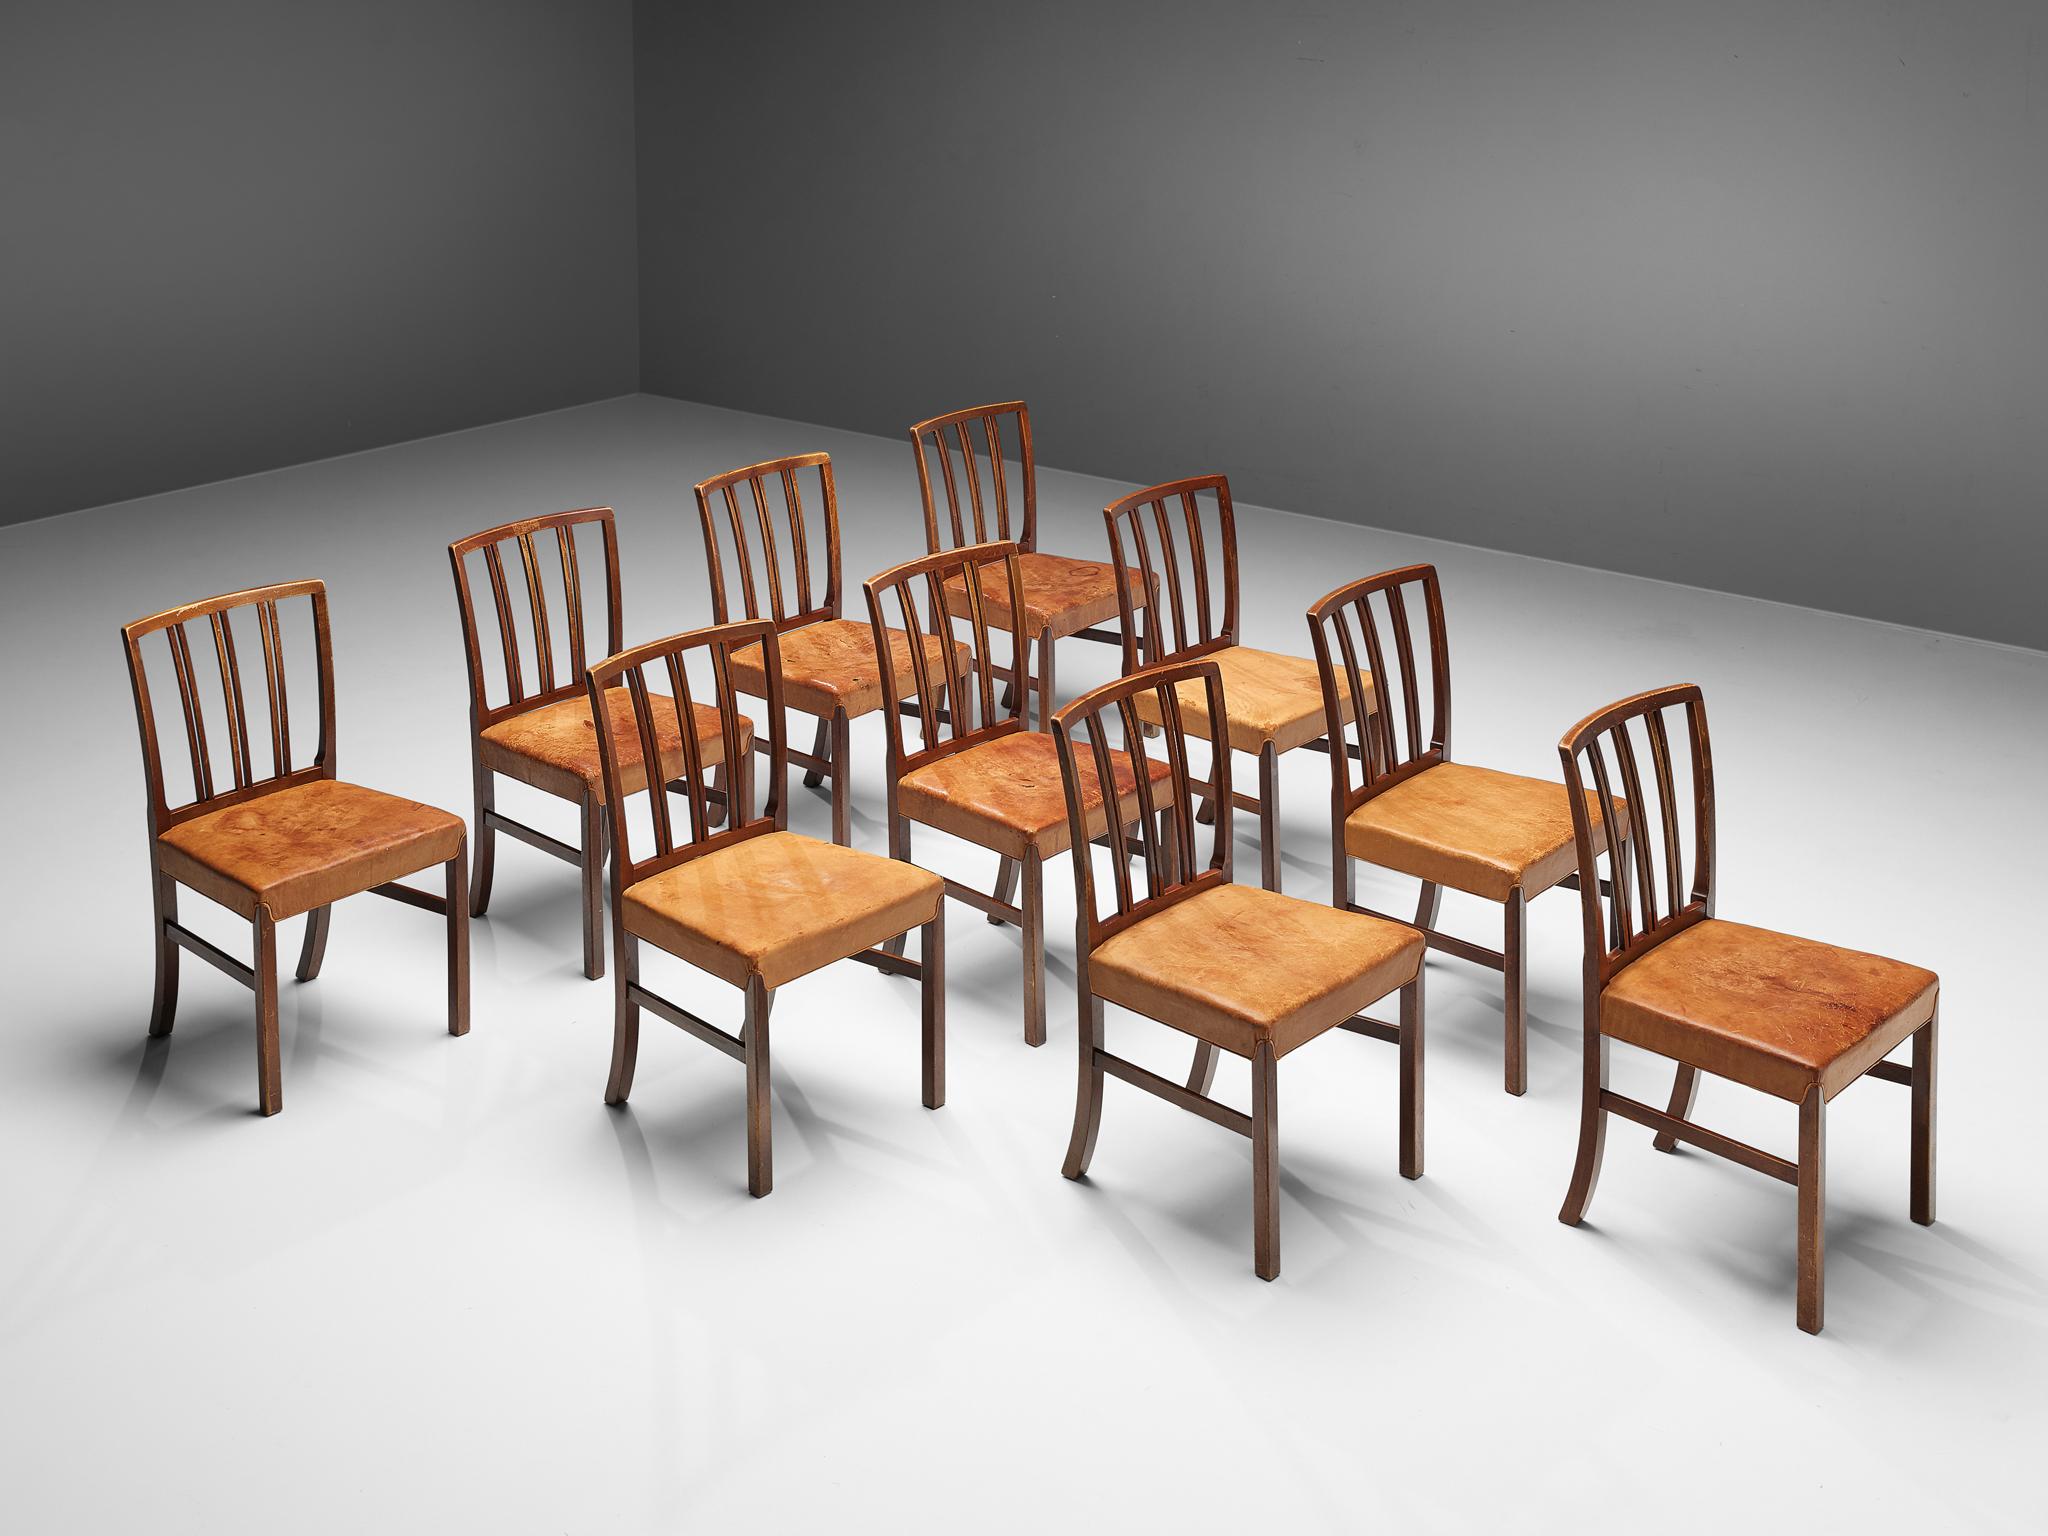 Ole Wanscher for Fritz Hansen, set of 10 dining chairs, walnut, cognac leather, Denmark, 1960s

Excellent set of dining chairs designed by Ole Wanscher for Fritz Hansen. The elegant model has a very notable backrest with a slight curve, flowing